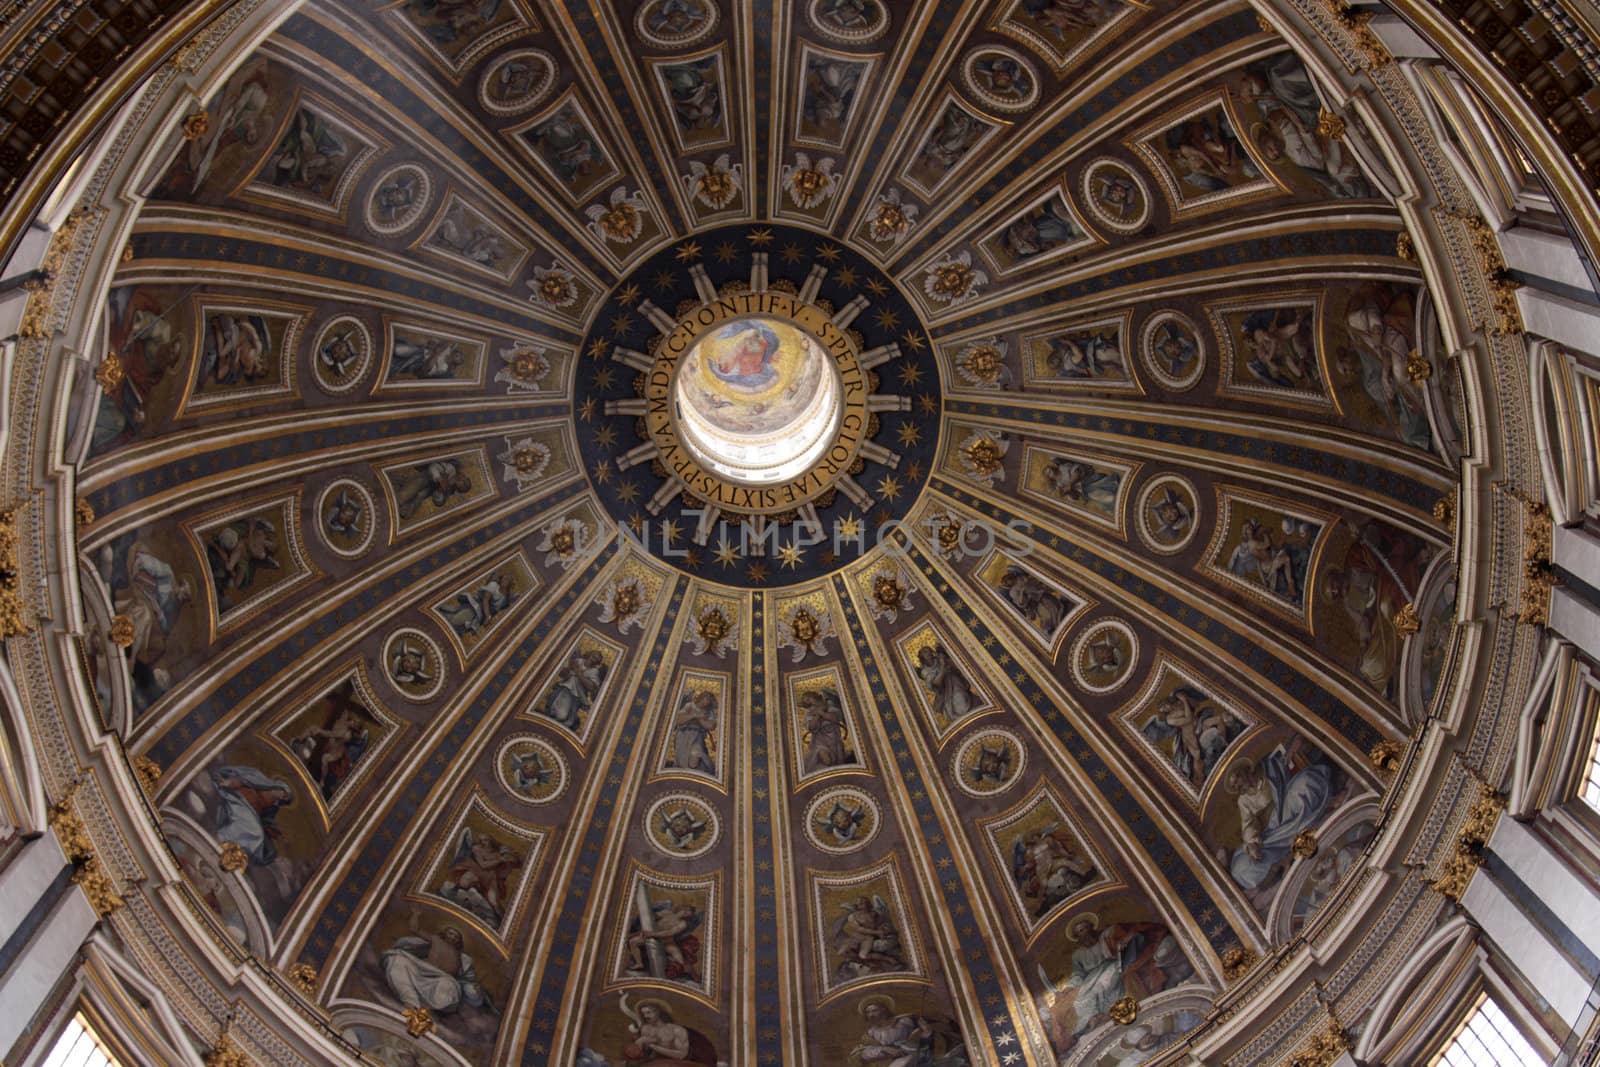 St. Peter's Dome
 by ca2hill